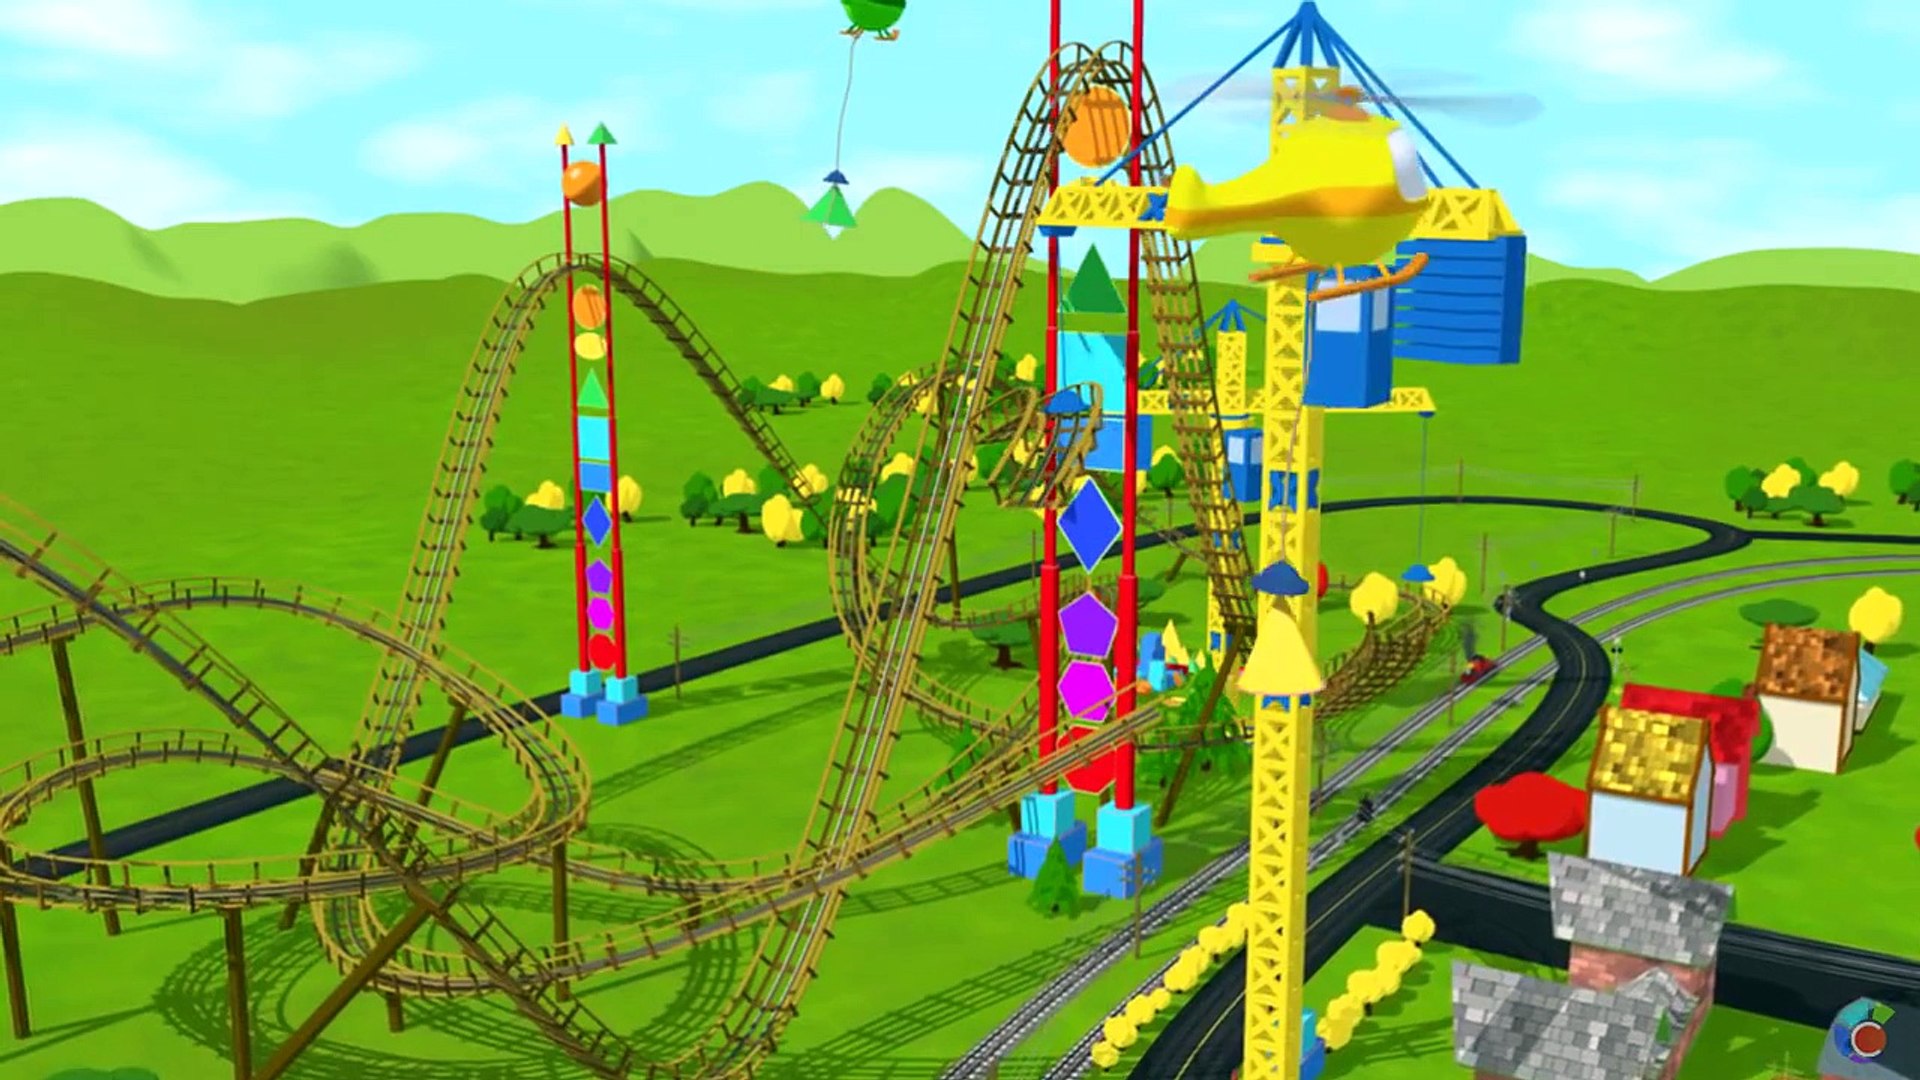 Learn about Shapes with Shawns Roller Coaster Adventure! (Learn 15 2D and  3D shapes) - Dailymotion Video